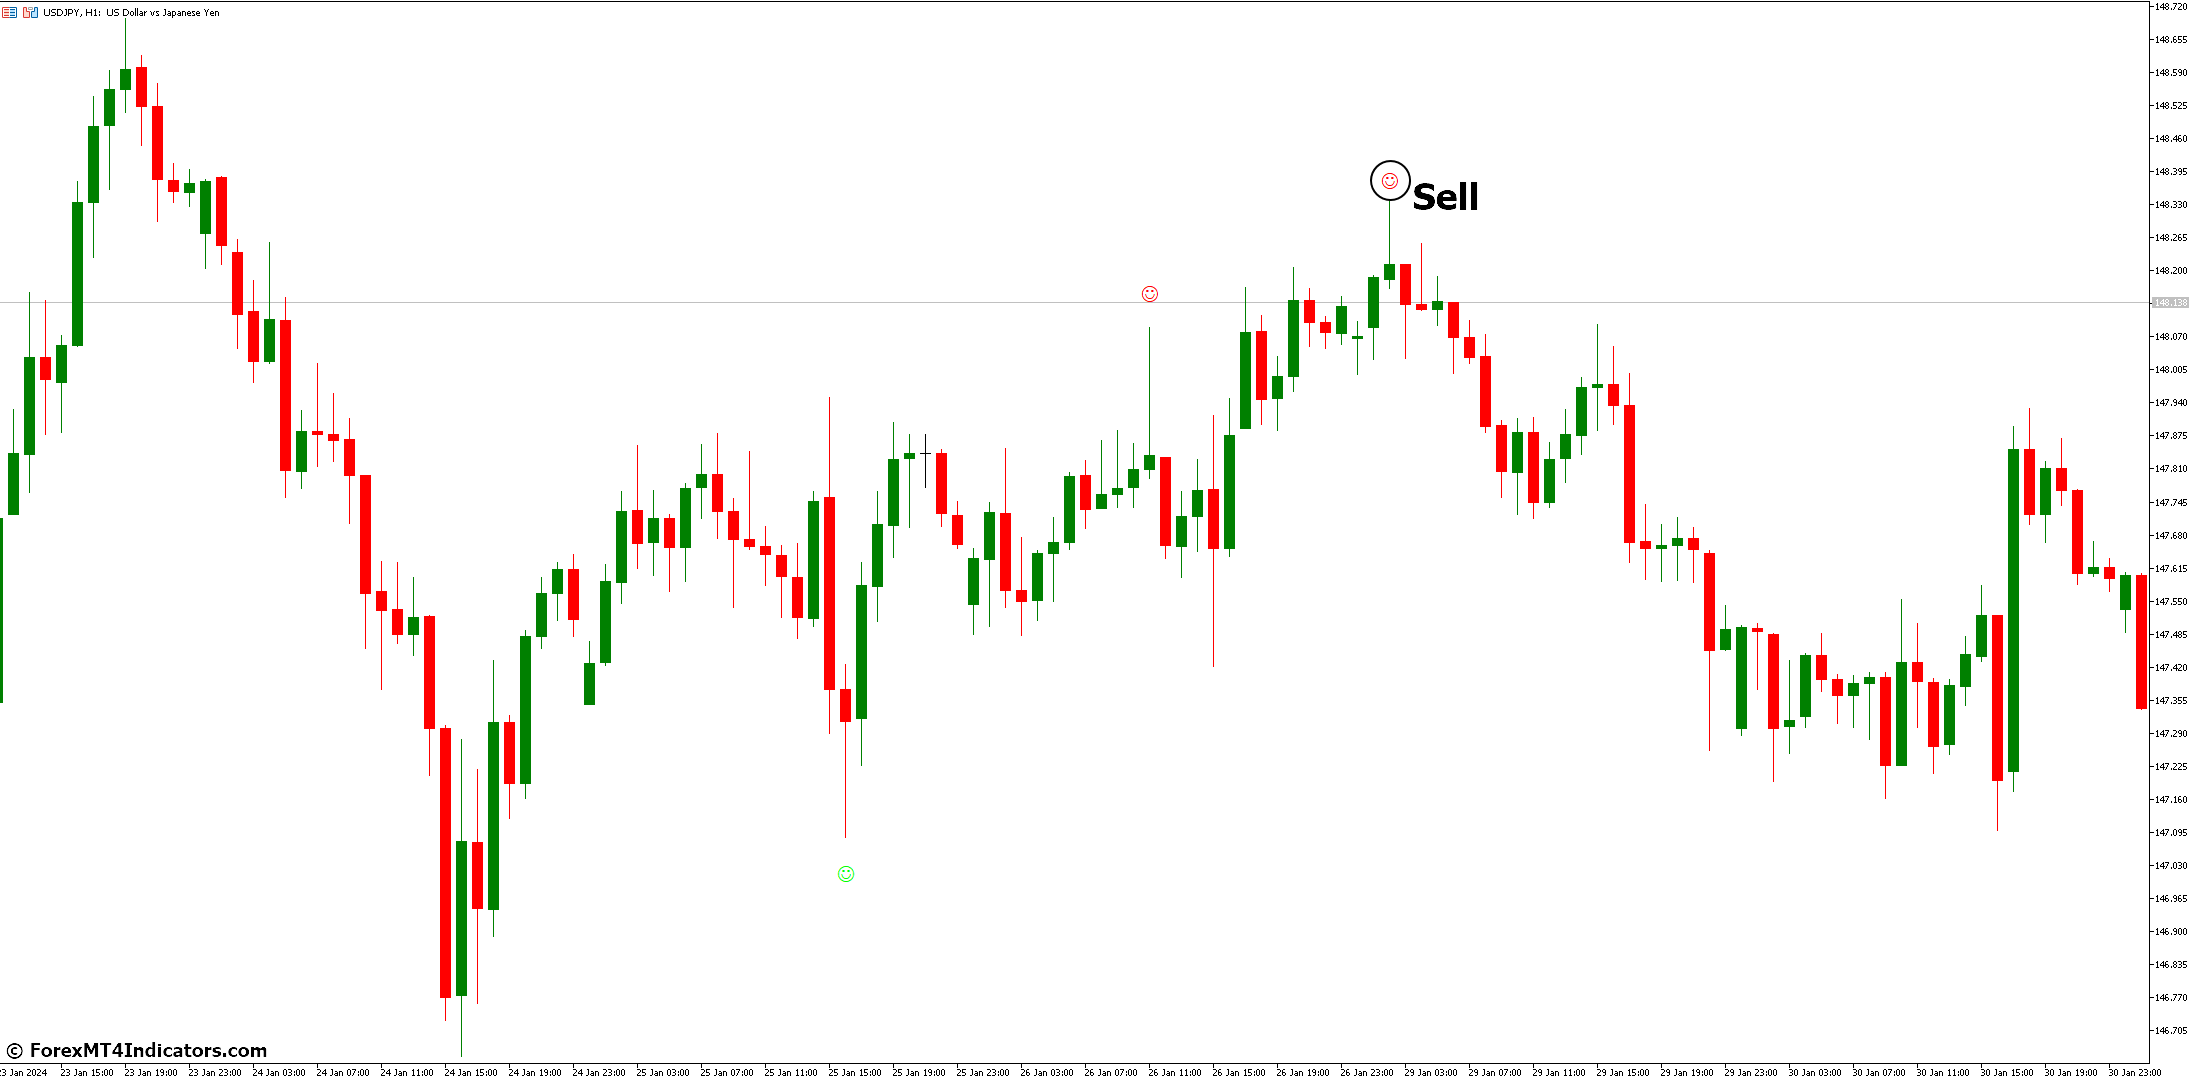 How to Trade with Pinbar Detector Indicator - Sell Entry